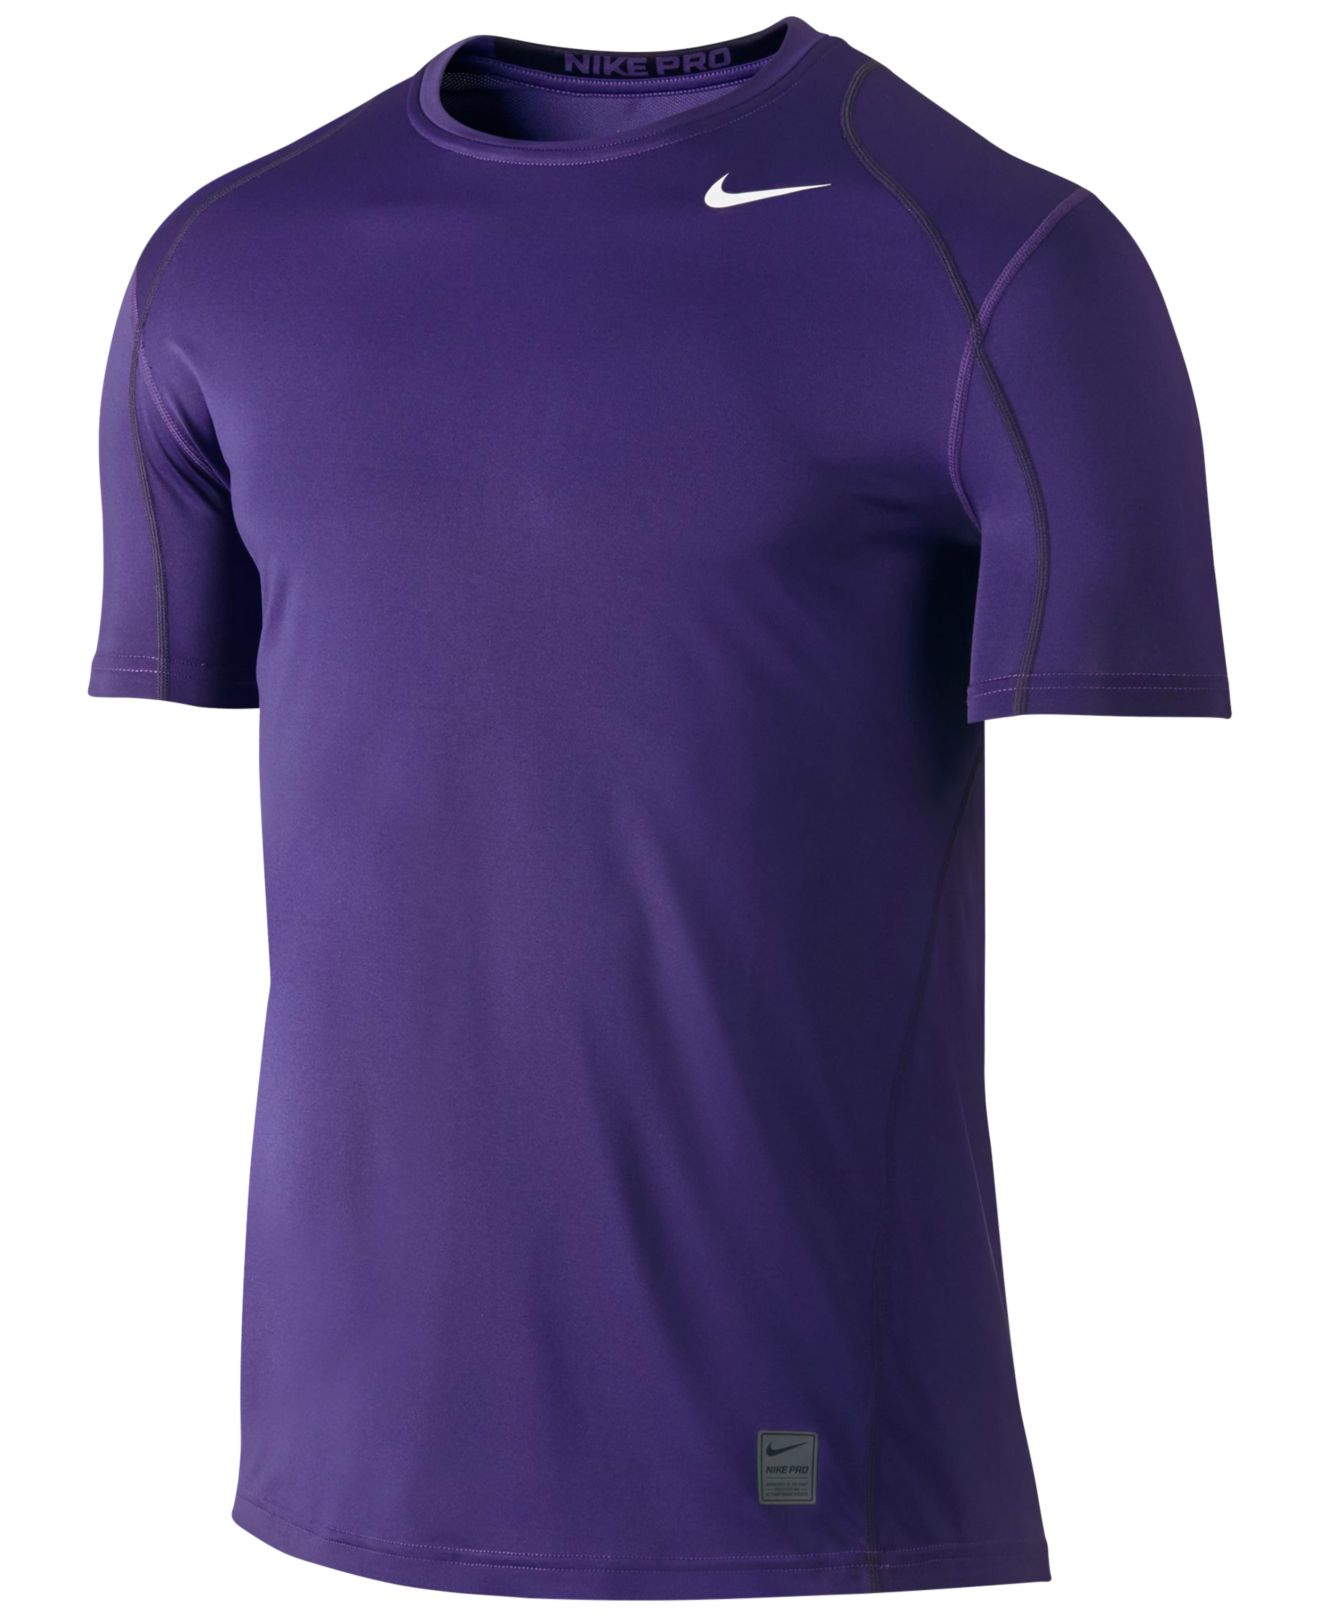 Lyst - Nike Men's Pro Cool Fitted Dri-fit Shirt in Purple for Men